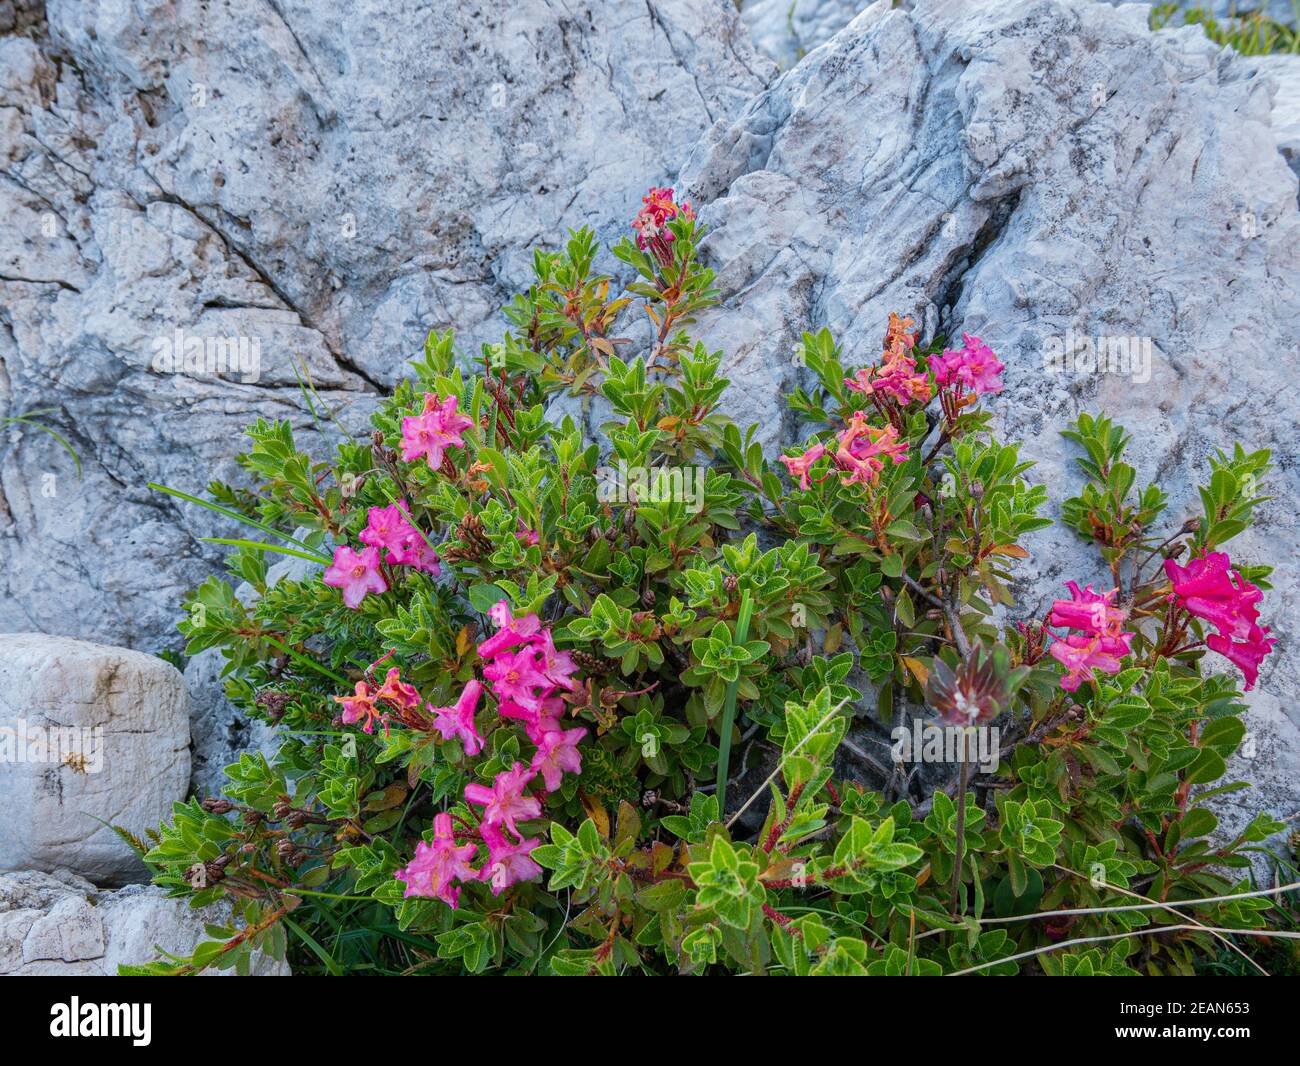 Small shrub with pink flowers on a rock Stock Photo